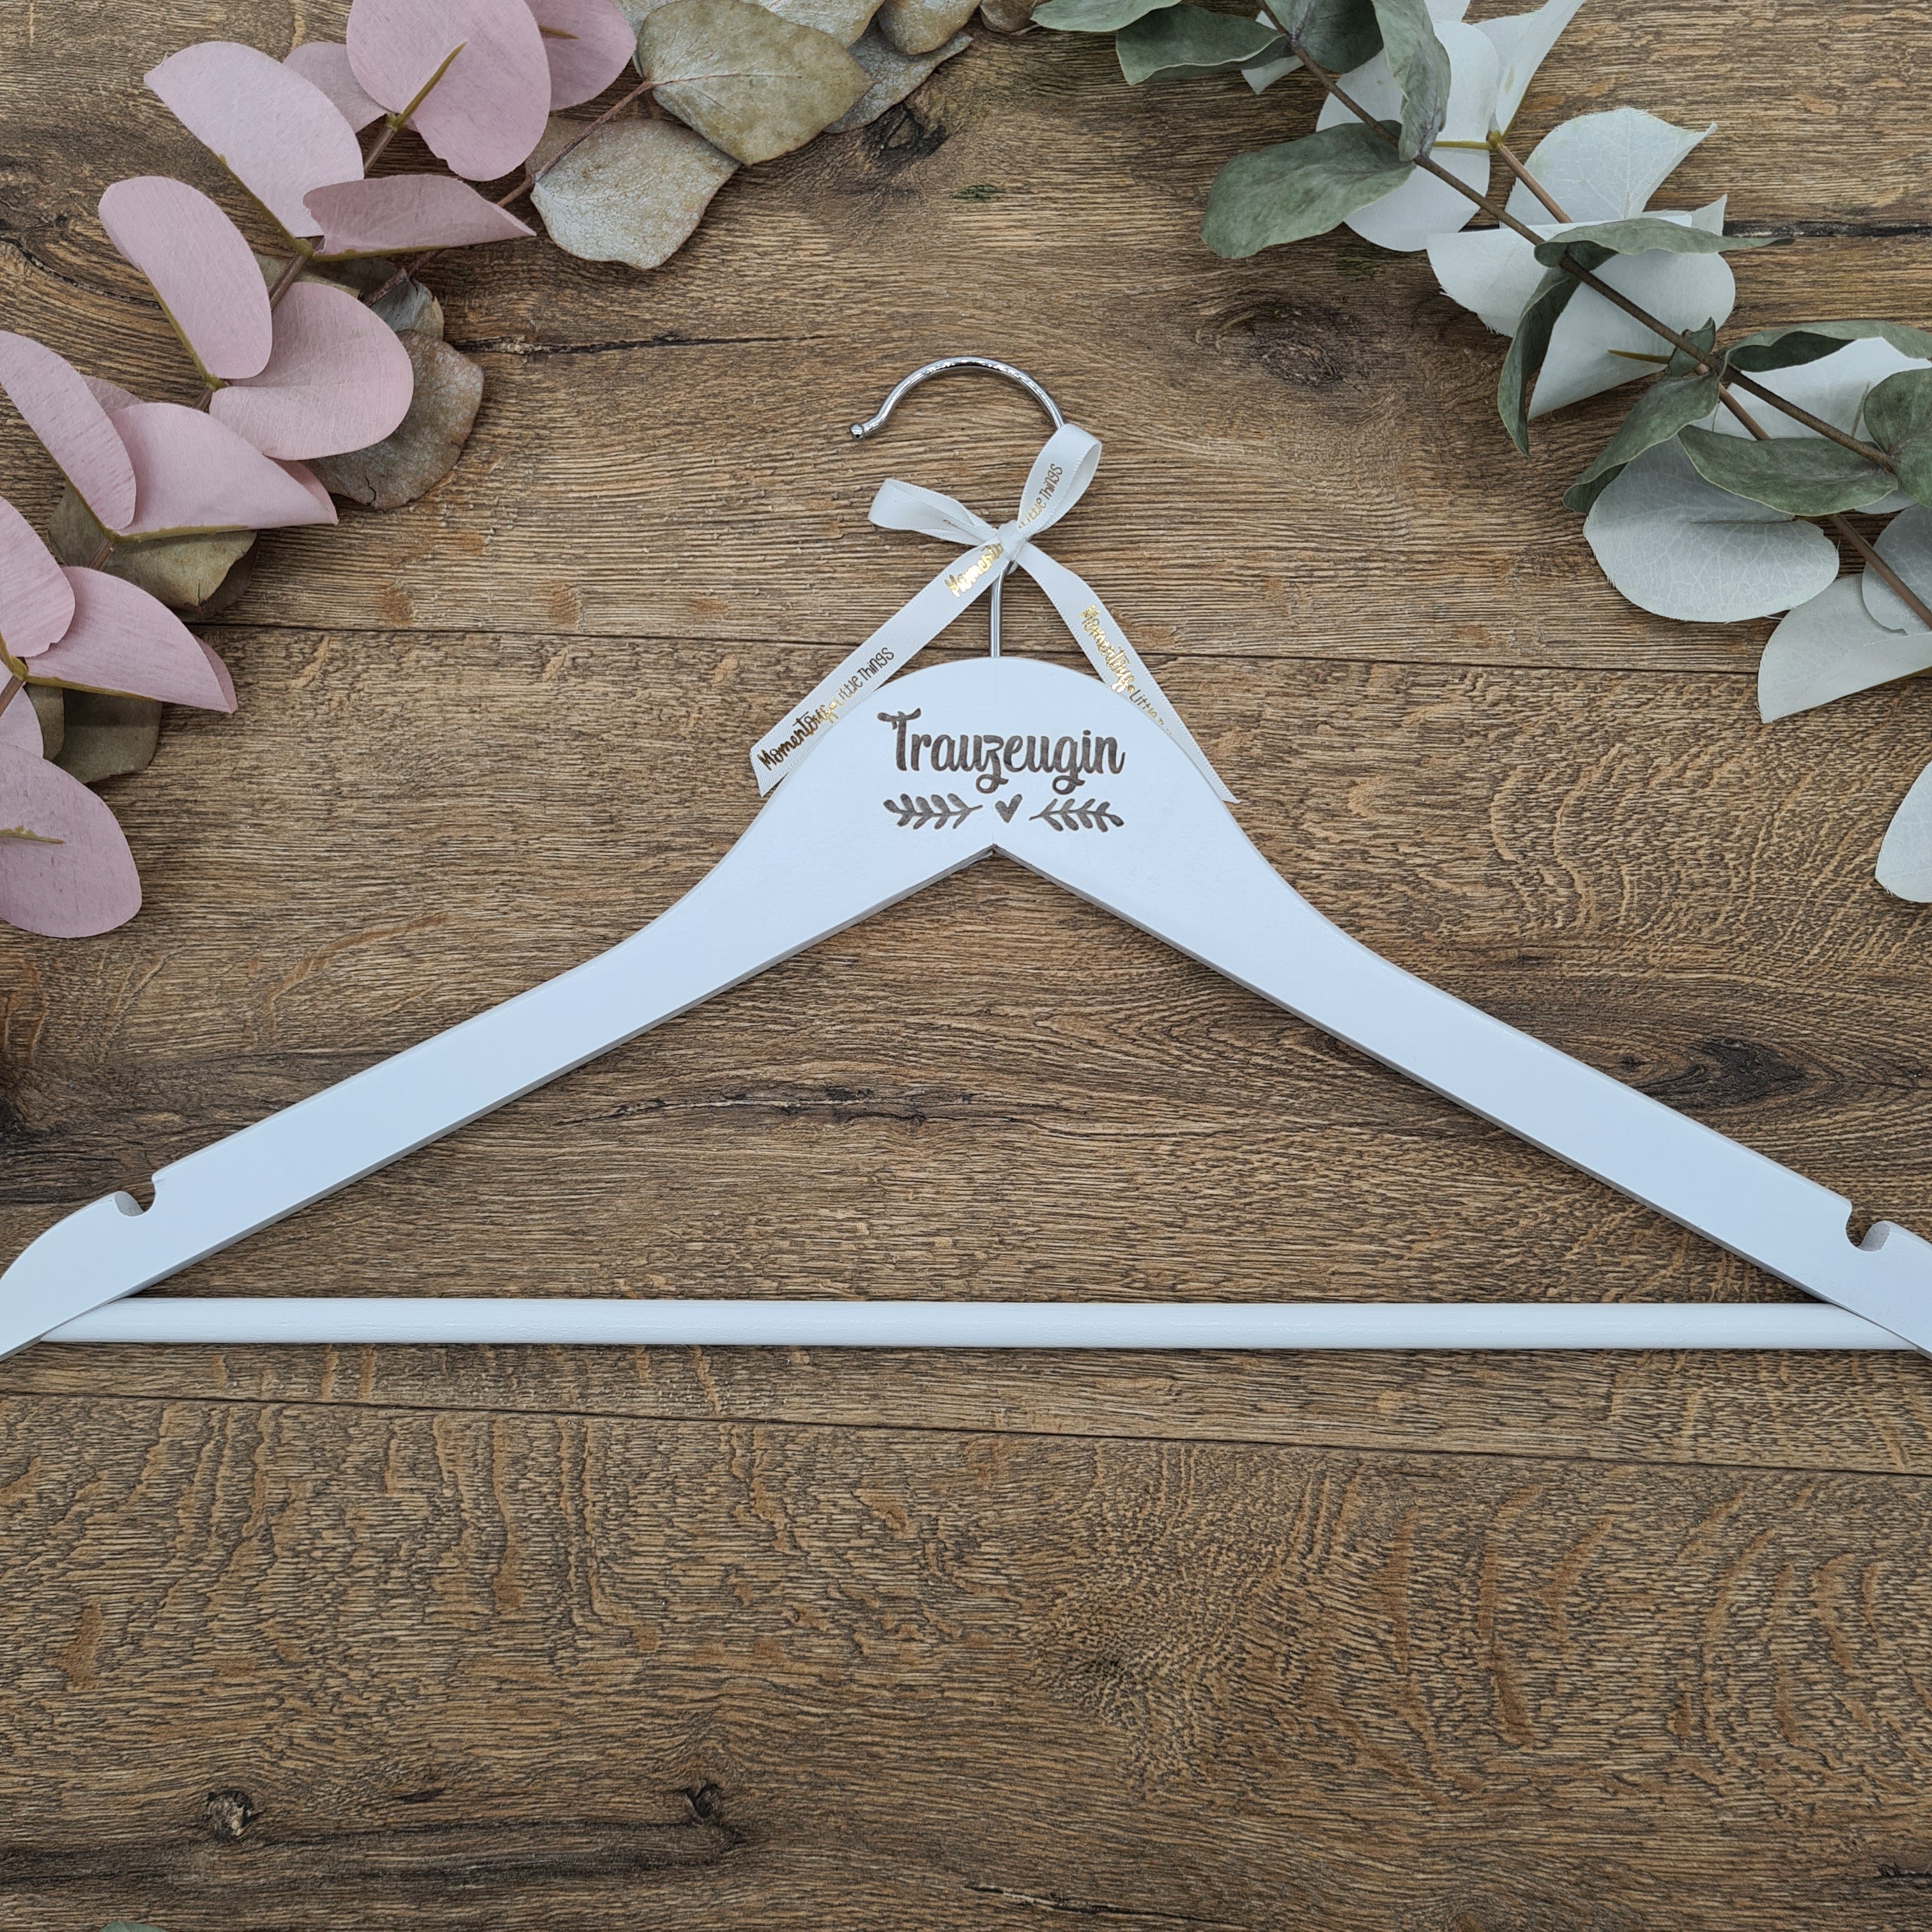 Wood-Engraved "Maid of Honor" Hanger with Botanical Greenery Leaf Detail